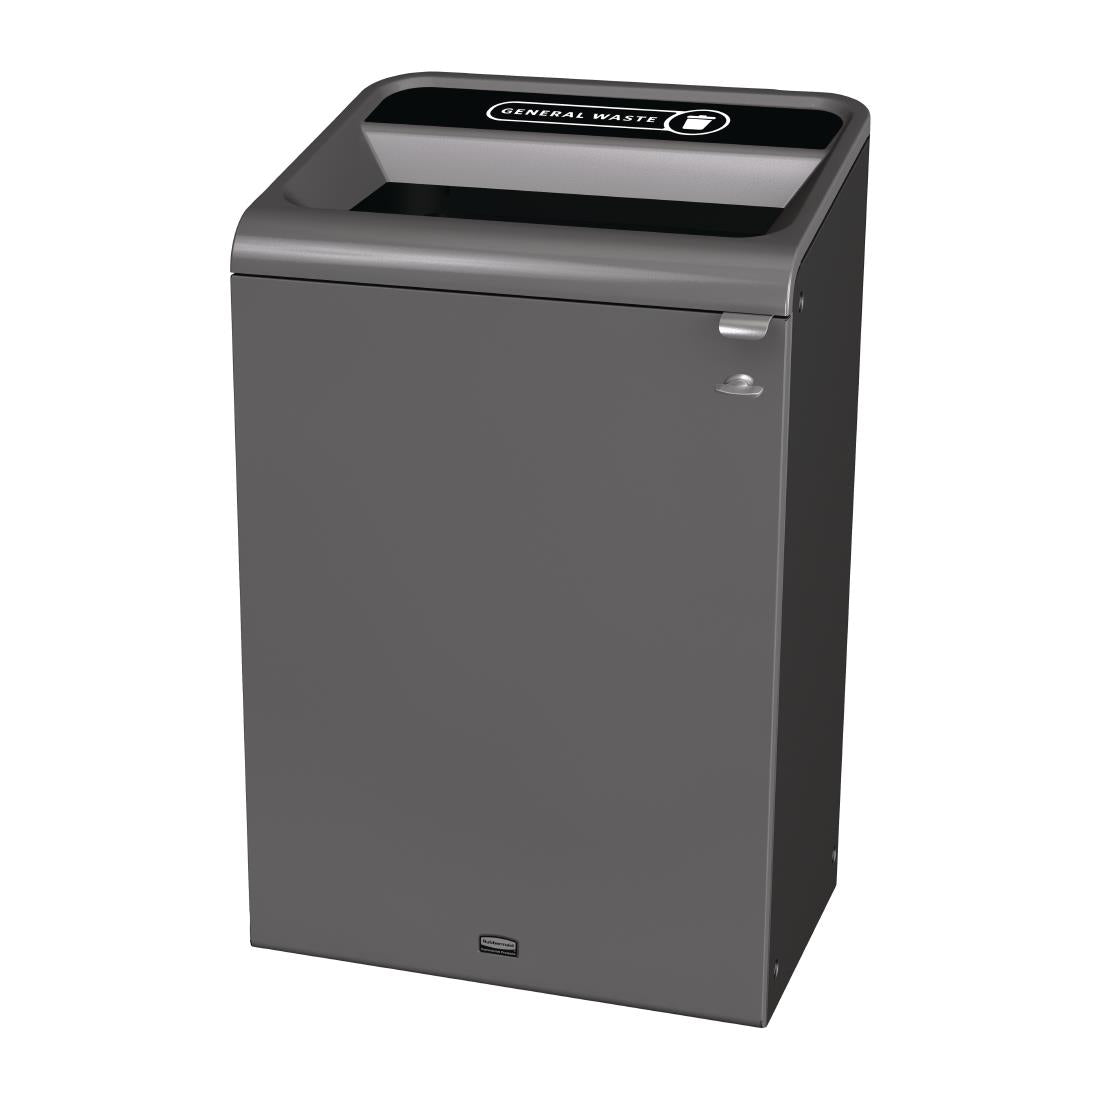 CX980 Rubbermaid Configure Recycling Bin with General Waste Label Black 125L JD Catering Equipment Solutions Ltd